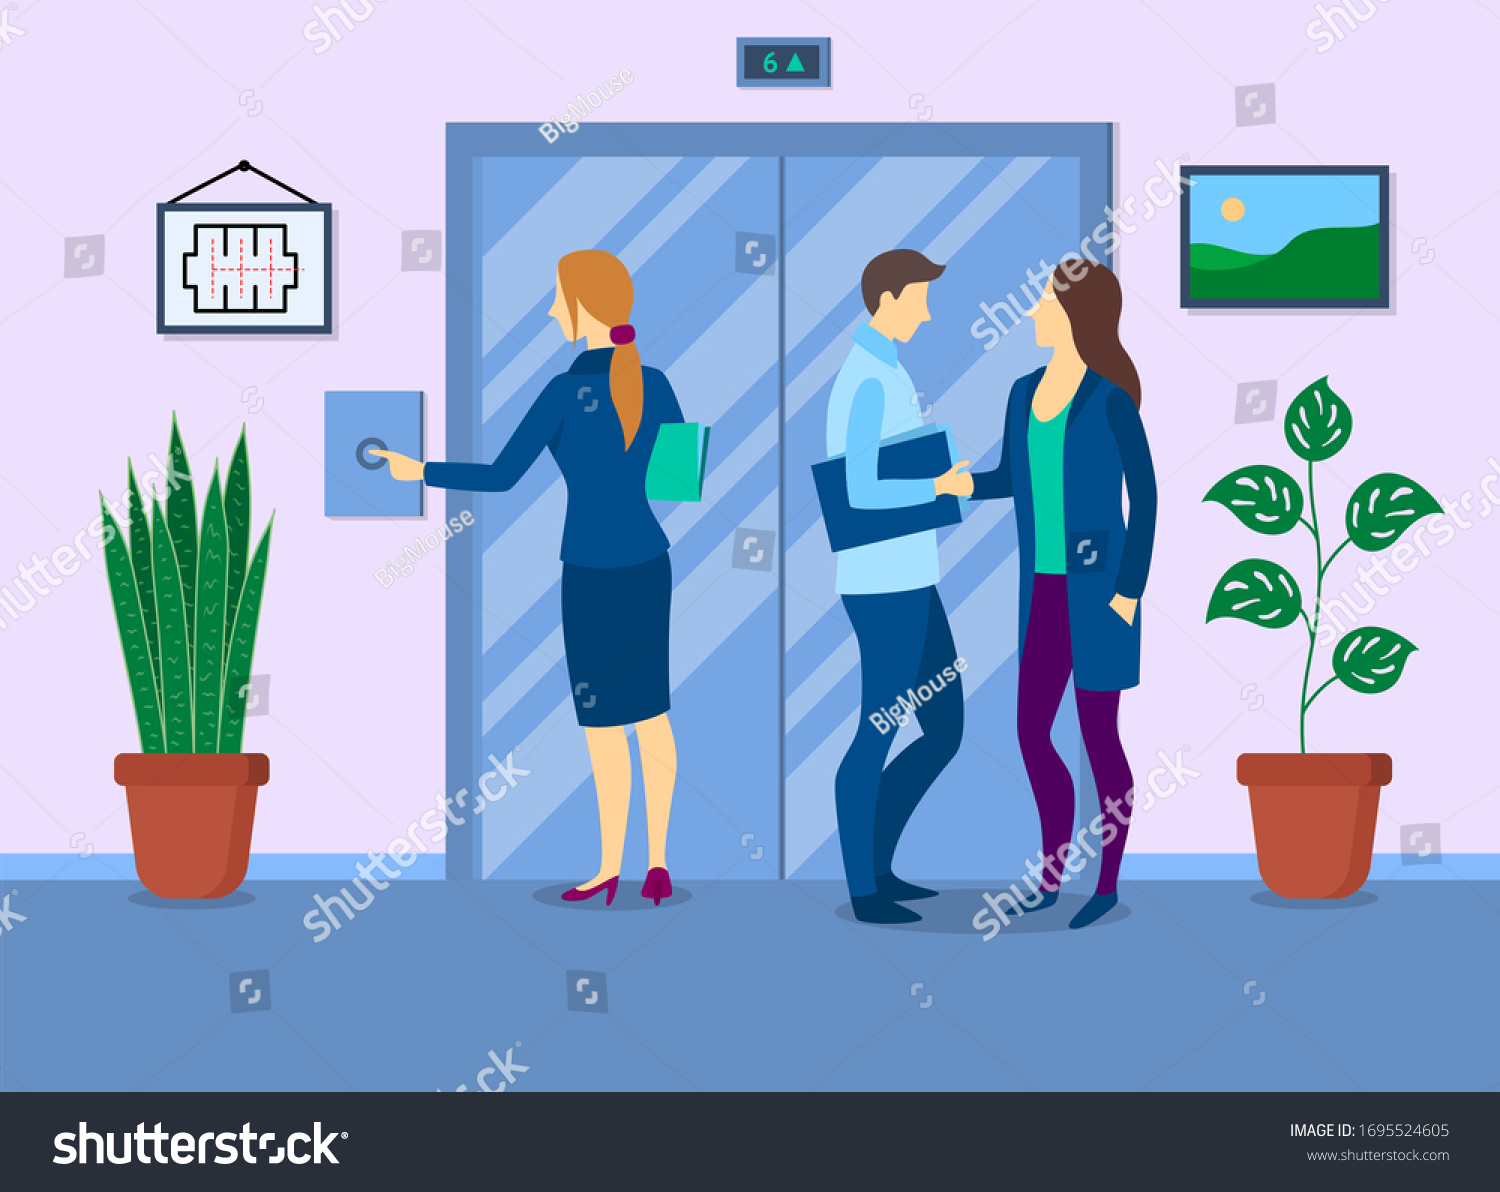 Cartoon Color Characters People and Waiting Elevator Concept Flat Design Interior Business Building. Vector illustration of Lift #1695524605